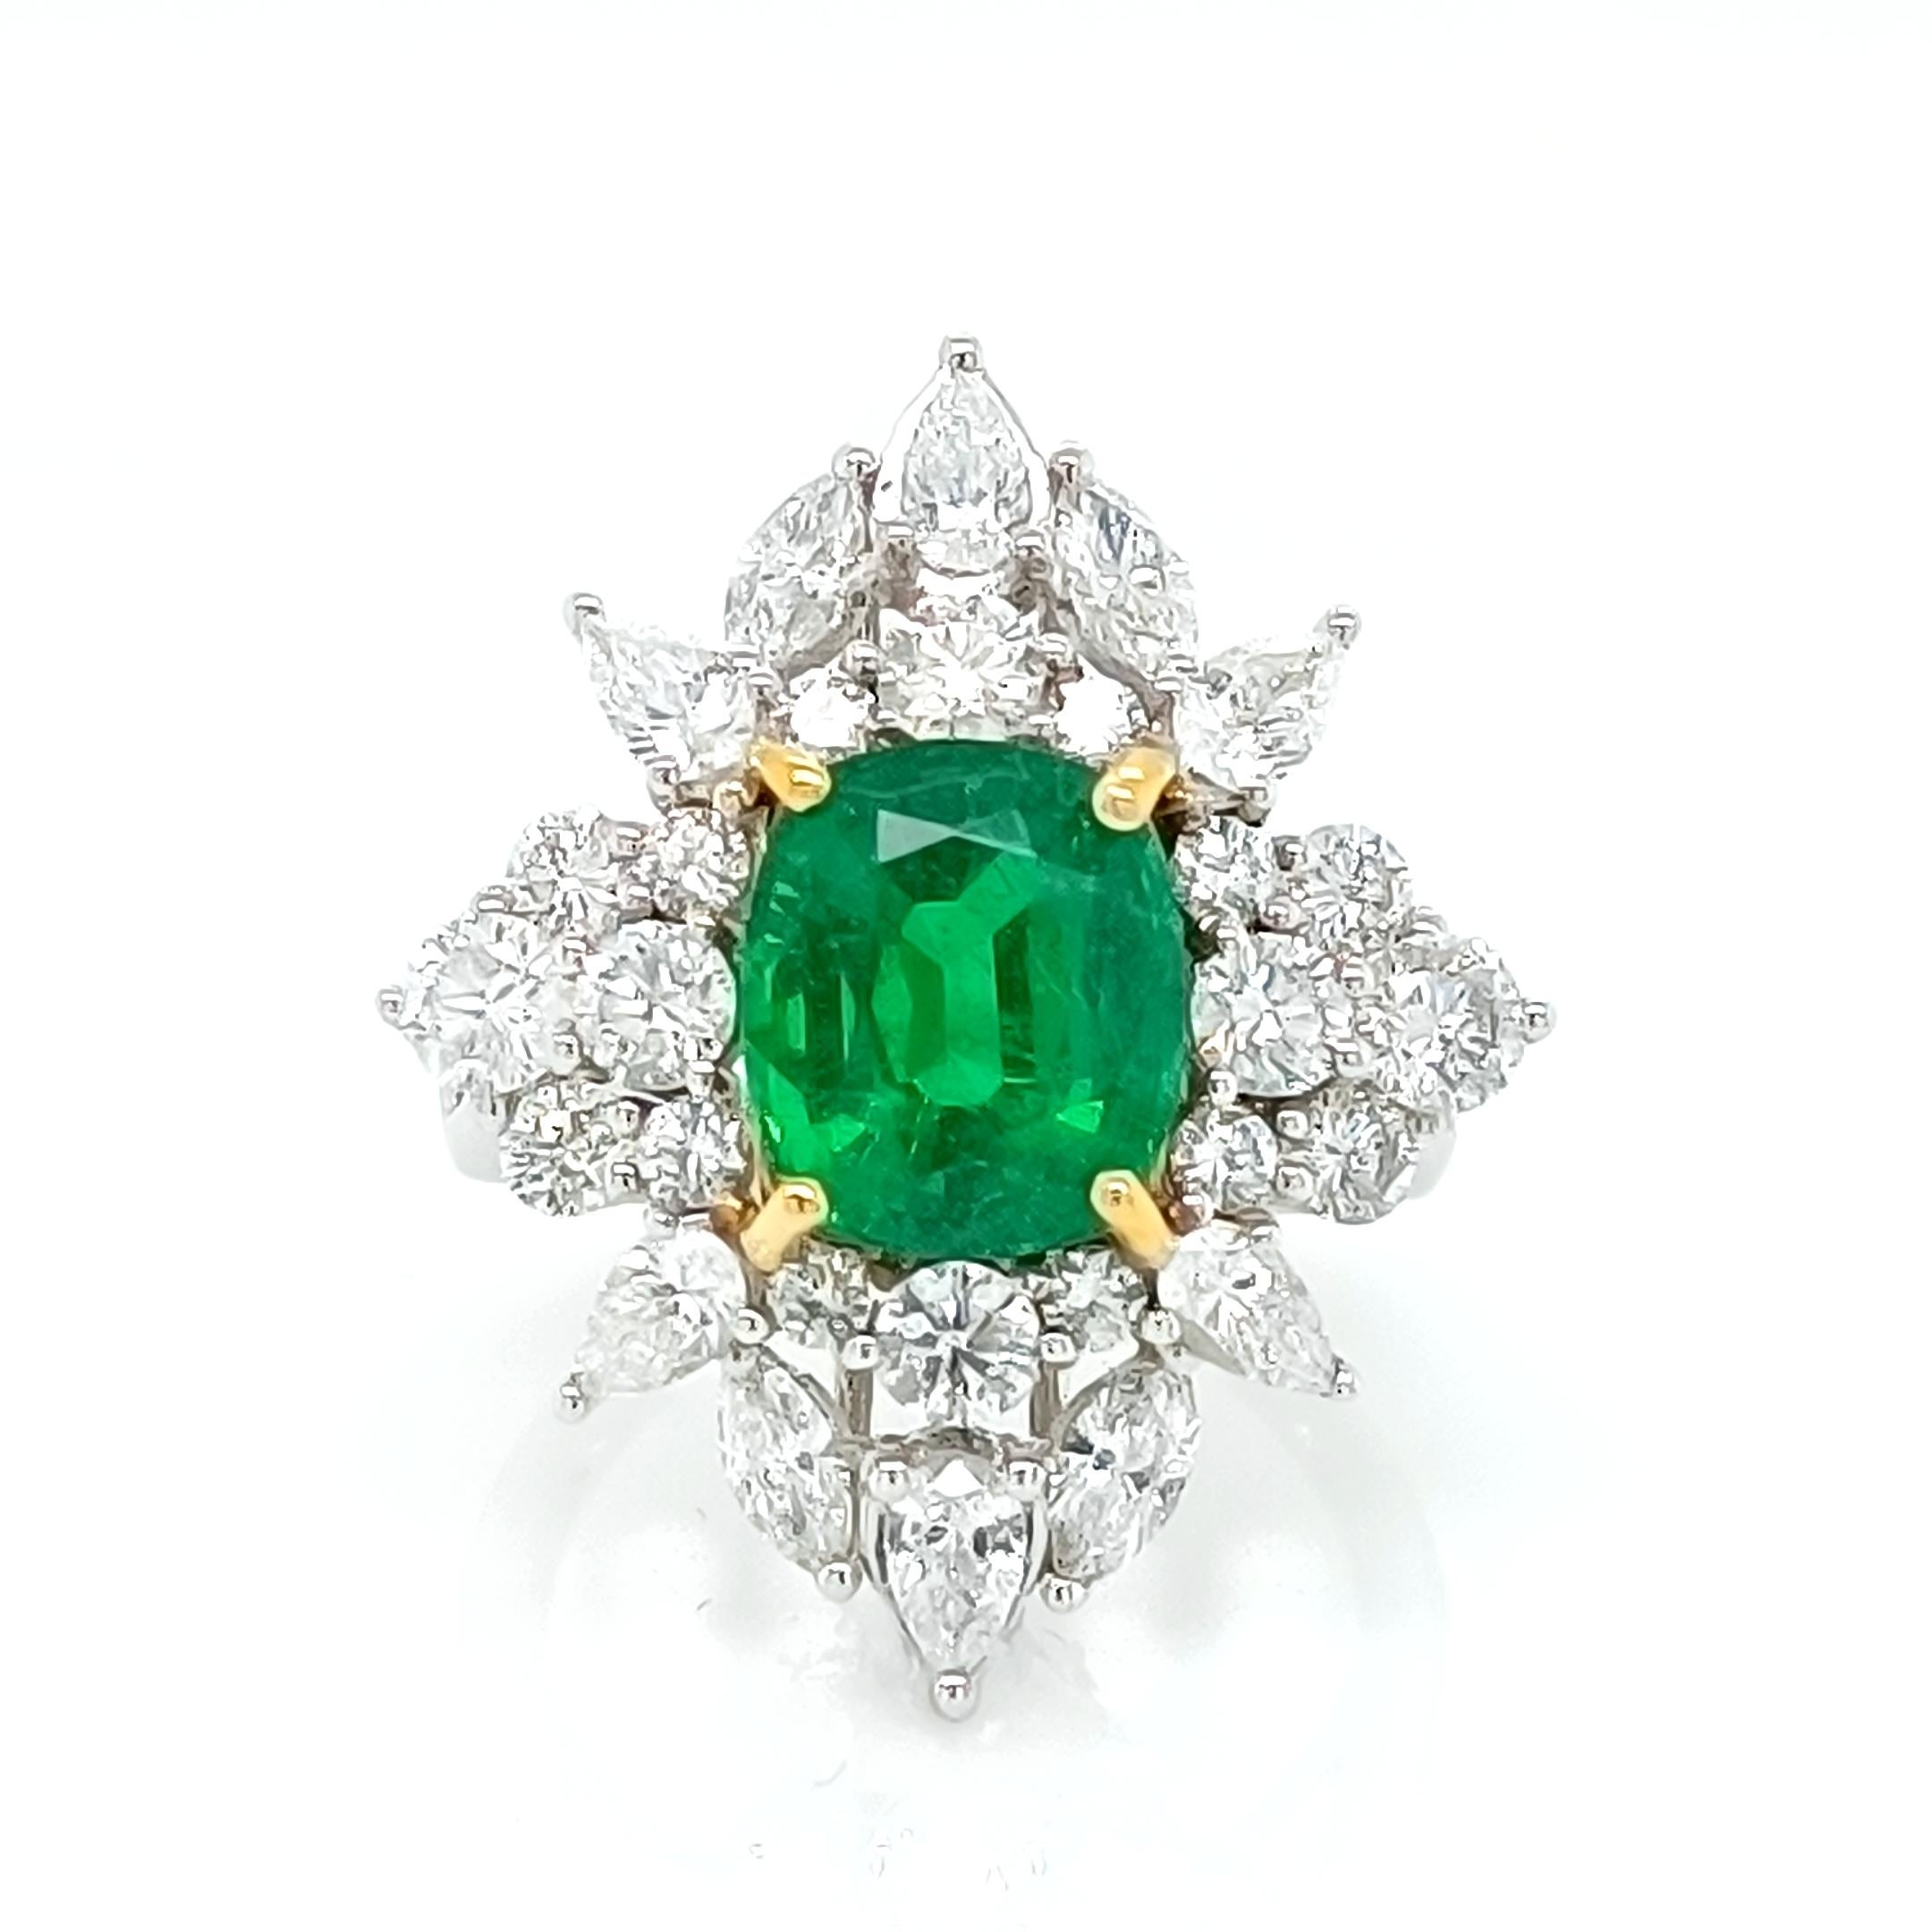 Cushion cut Zambian Emerald 3.25 Cts accentuated by marquise, pear and round brilliant cut diamonds 2.75 Cts 

Set in 18K gold 2-Tone, 6.75 Grams

*Bright Emerald Green 